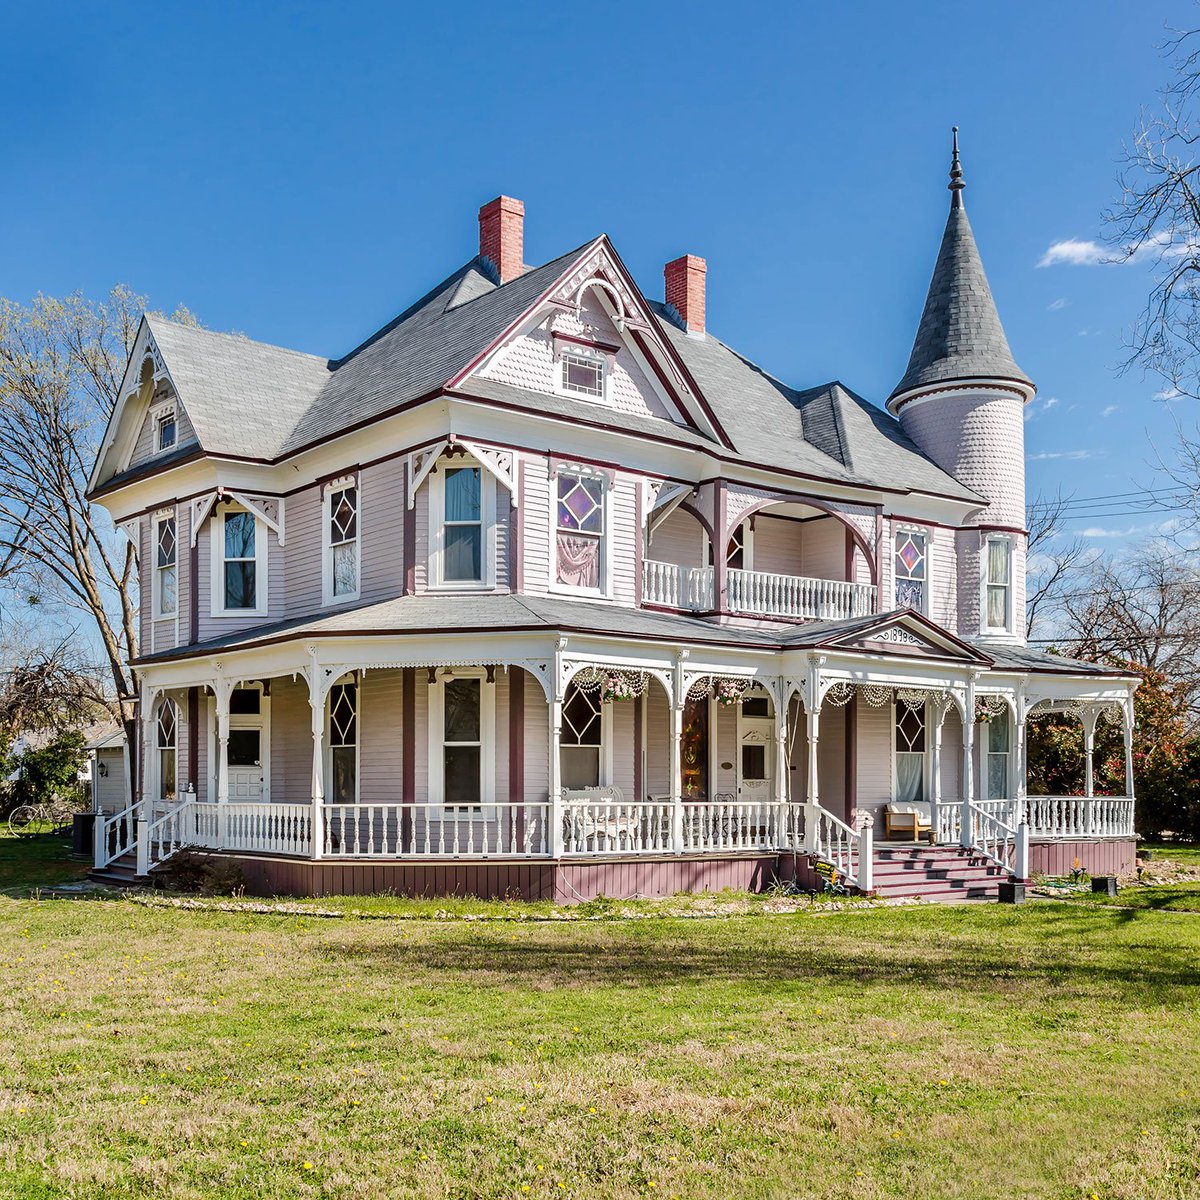 eclectic victorian style in plano, texas (1898)...